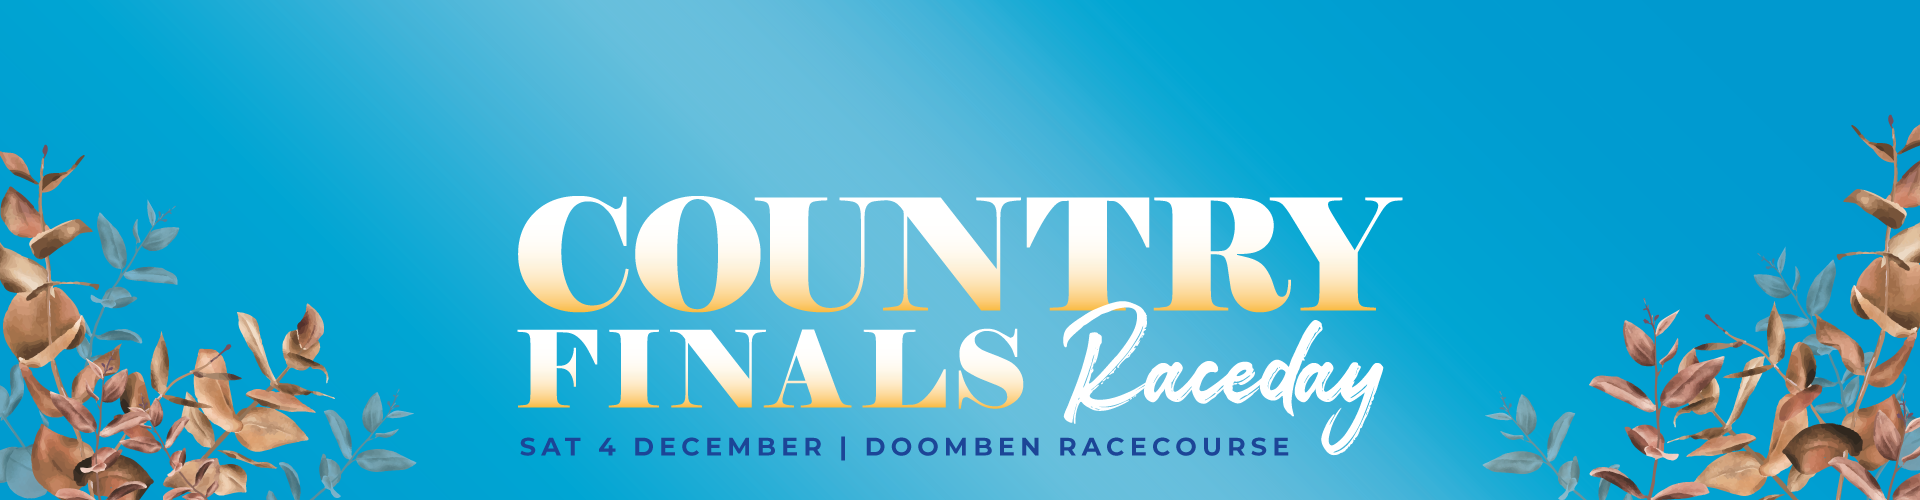 01_Country-Finals_Webpage-Banner_1920x550 | Brisbane Racing Club